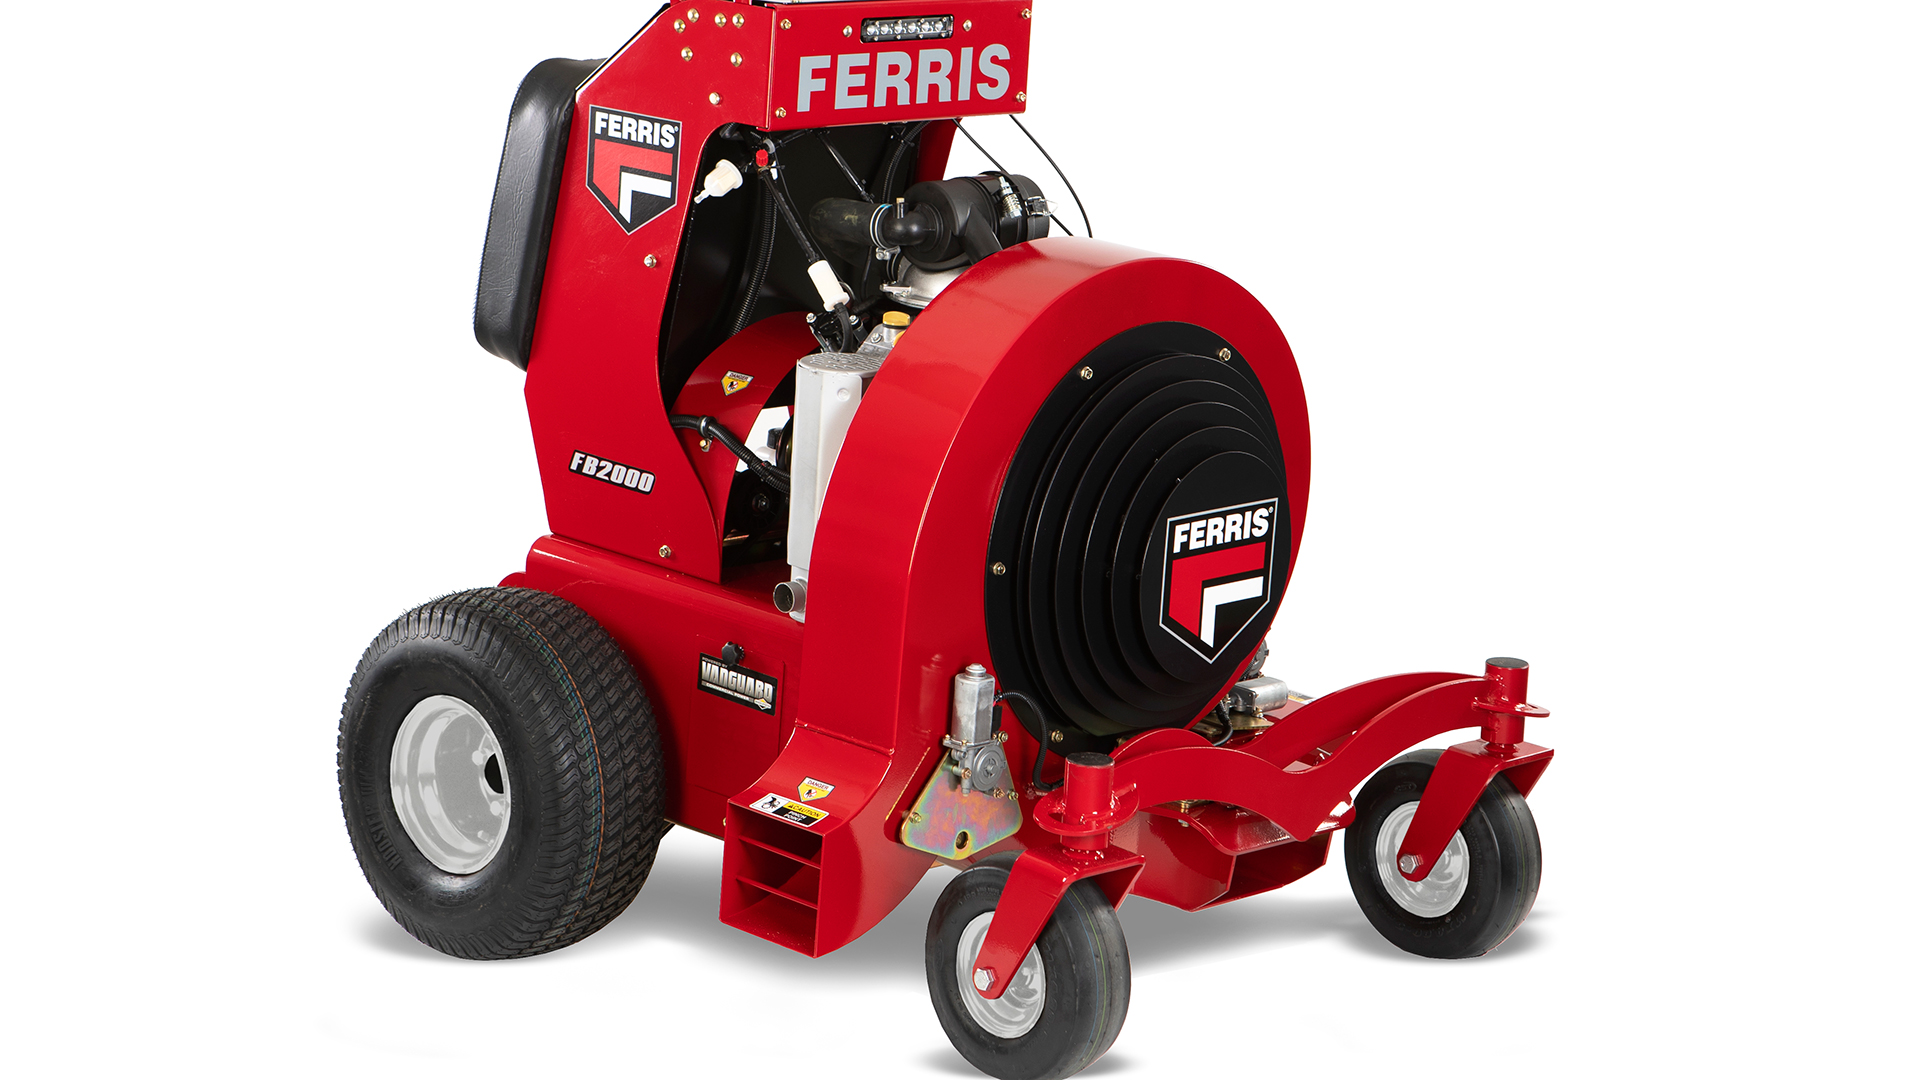 Ferris FB2000 Hurricane™ Stand-On Blower - 3-Way Air Discharge